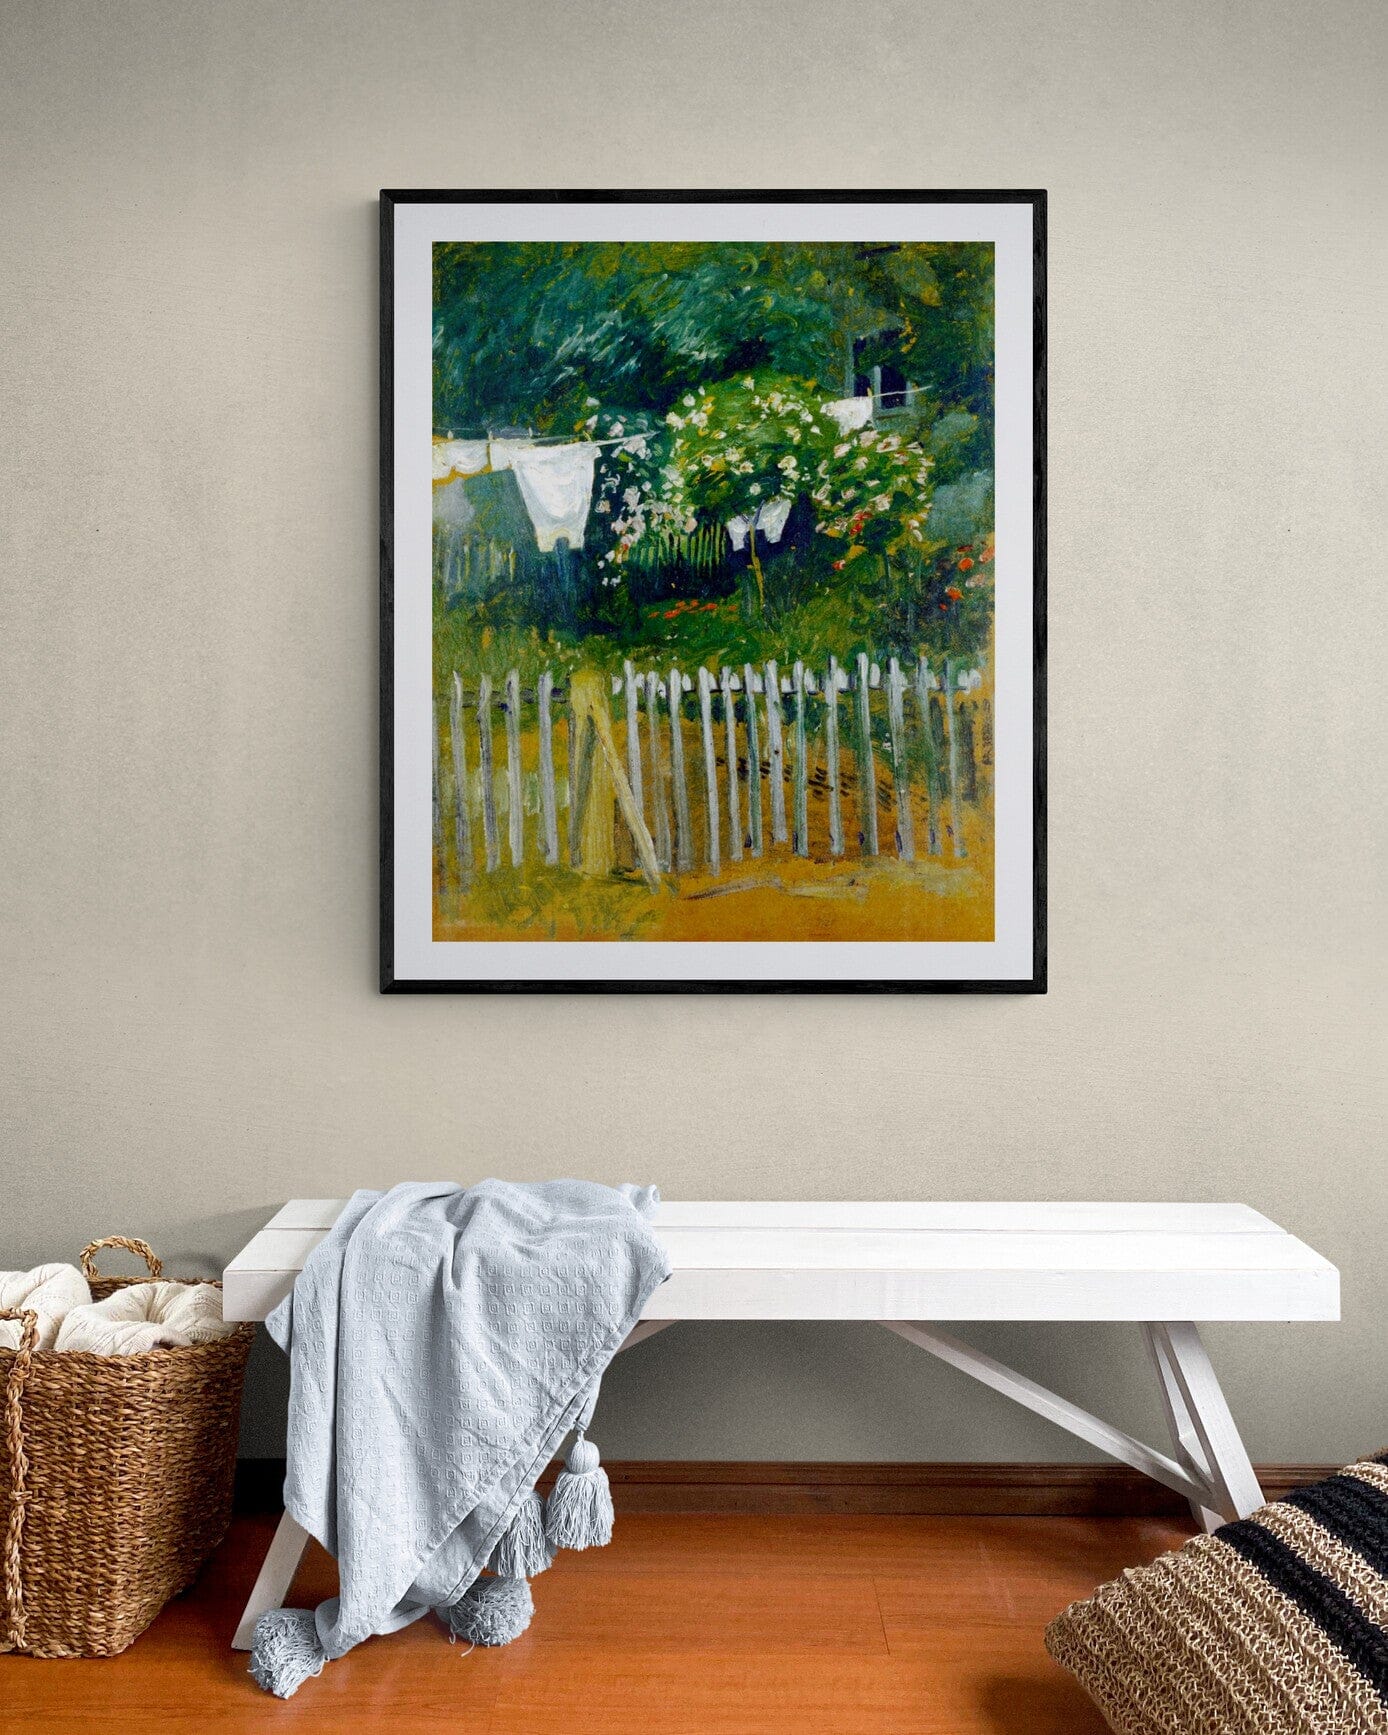 Clothes in the garden (1900s) | Laundry room wall art | August Macke Posters, Prints, & Visual Artwork The Trumpet Shop Vintage Prints   